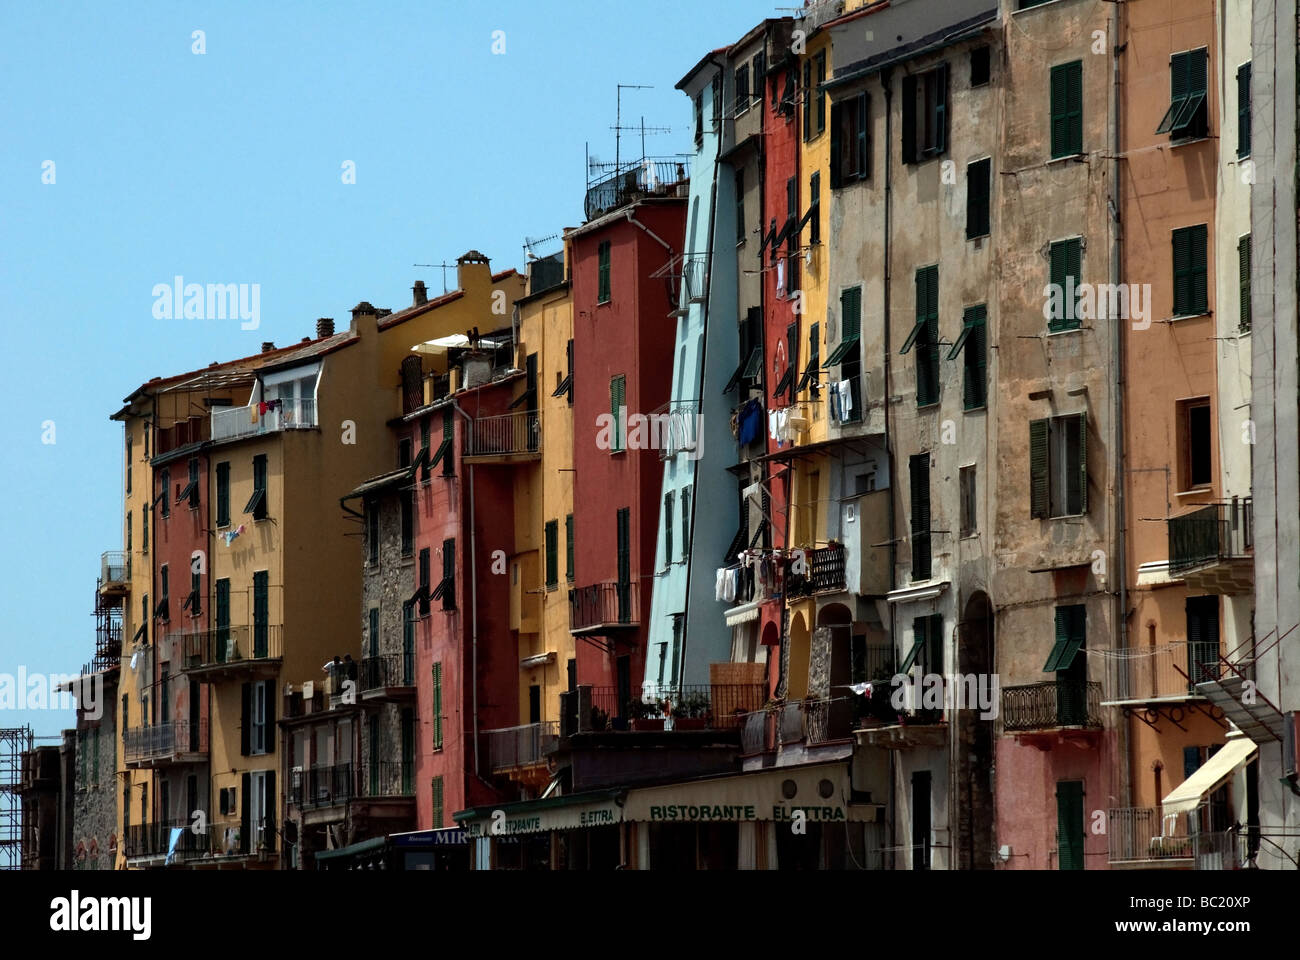 multistoried brightly coloured harbourside buildings dating from the medieval period in Portovenere Stock Photo